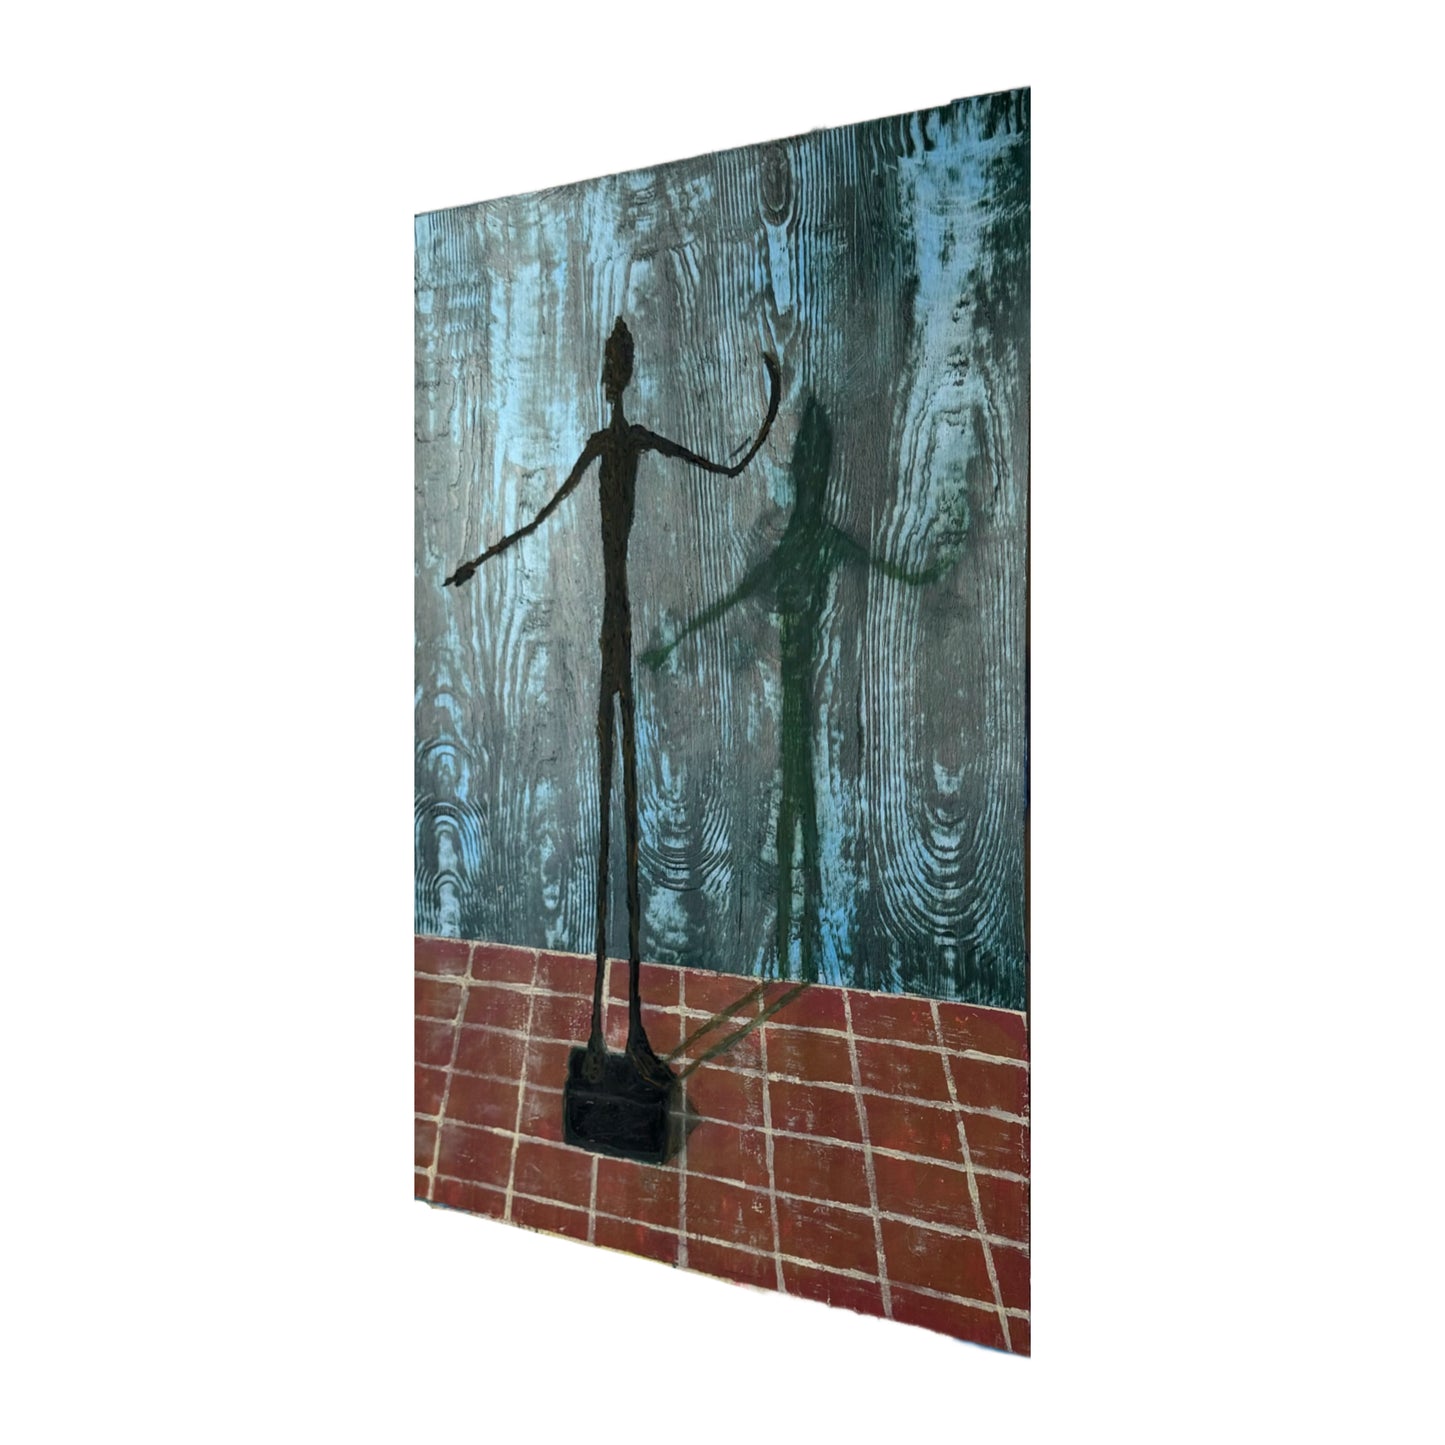 “Giacometti’s Man Pointing on Terracotta Tiles” 18x24 in